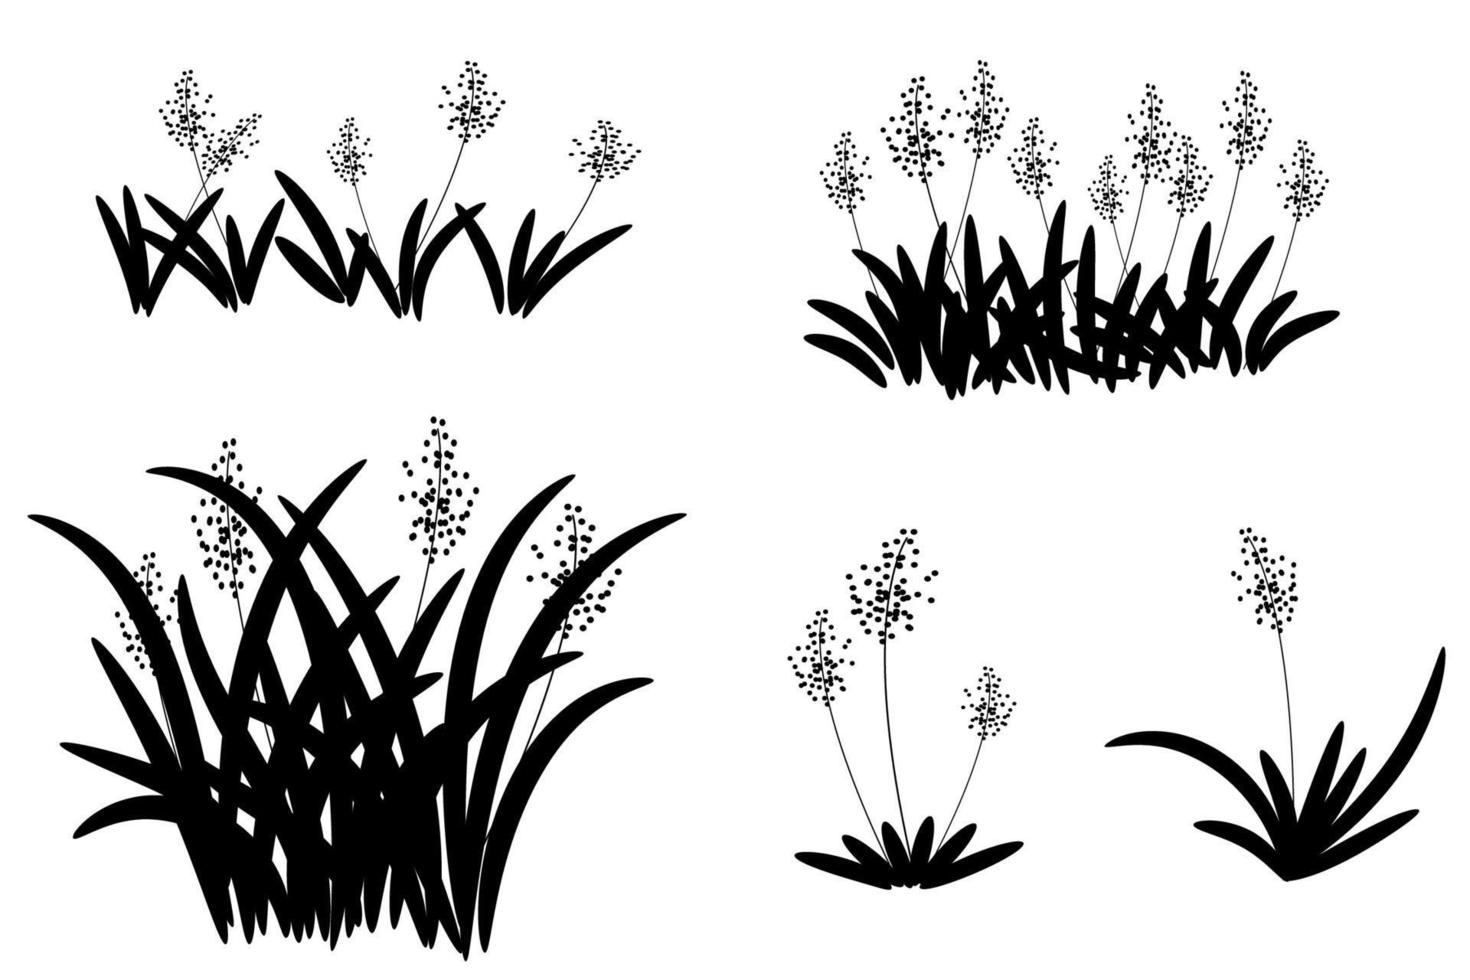 vector grass black and white set